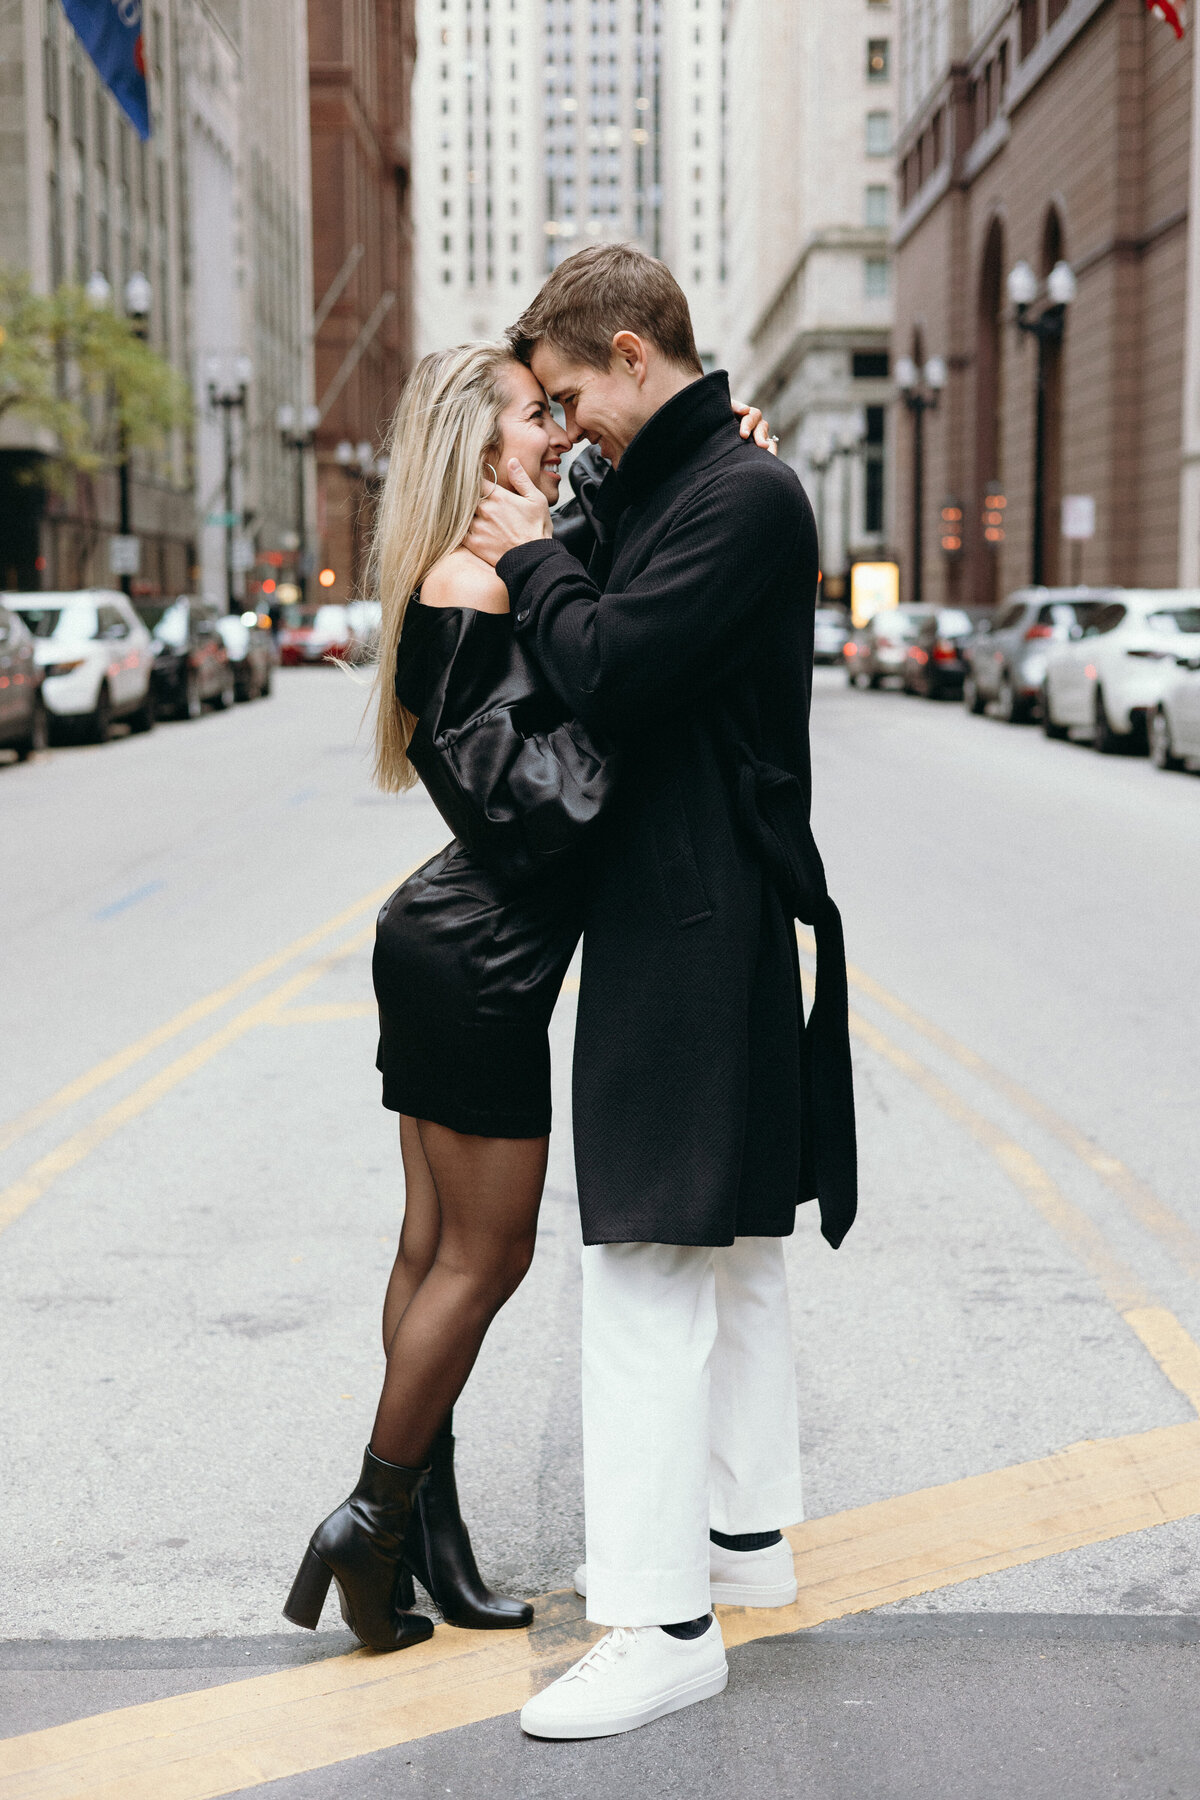 Fiances holding each other in front of Chicago Board of Trade during engagement shoot in Chicago, Illinois.